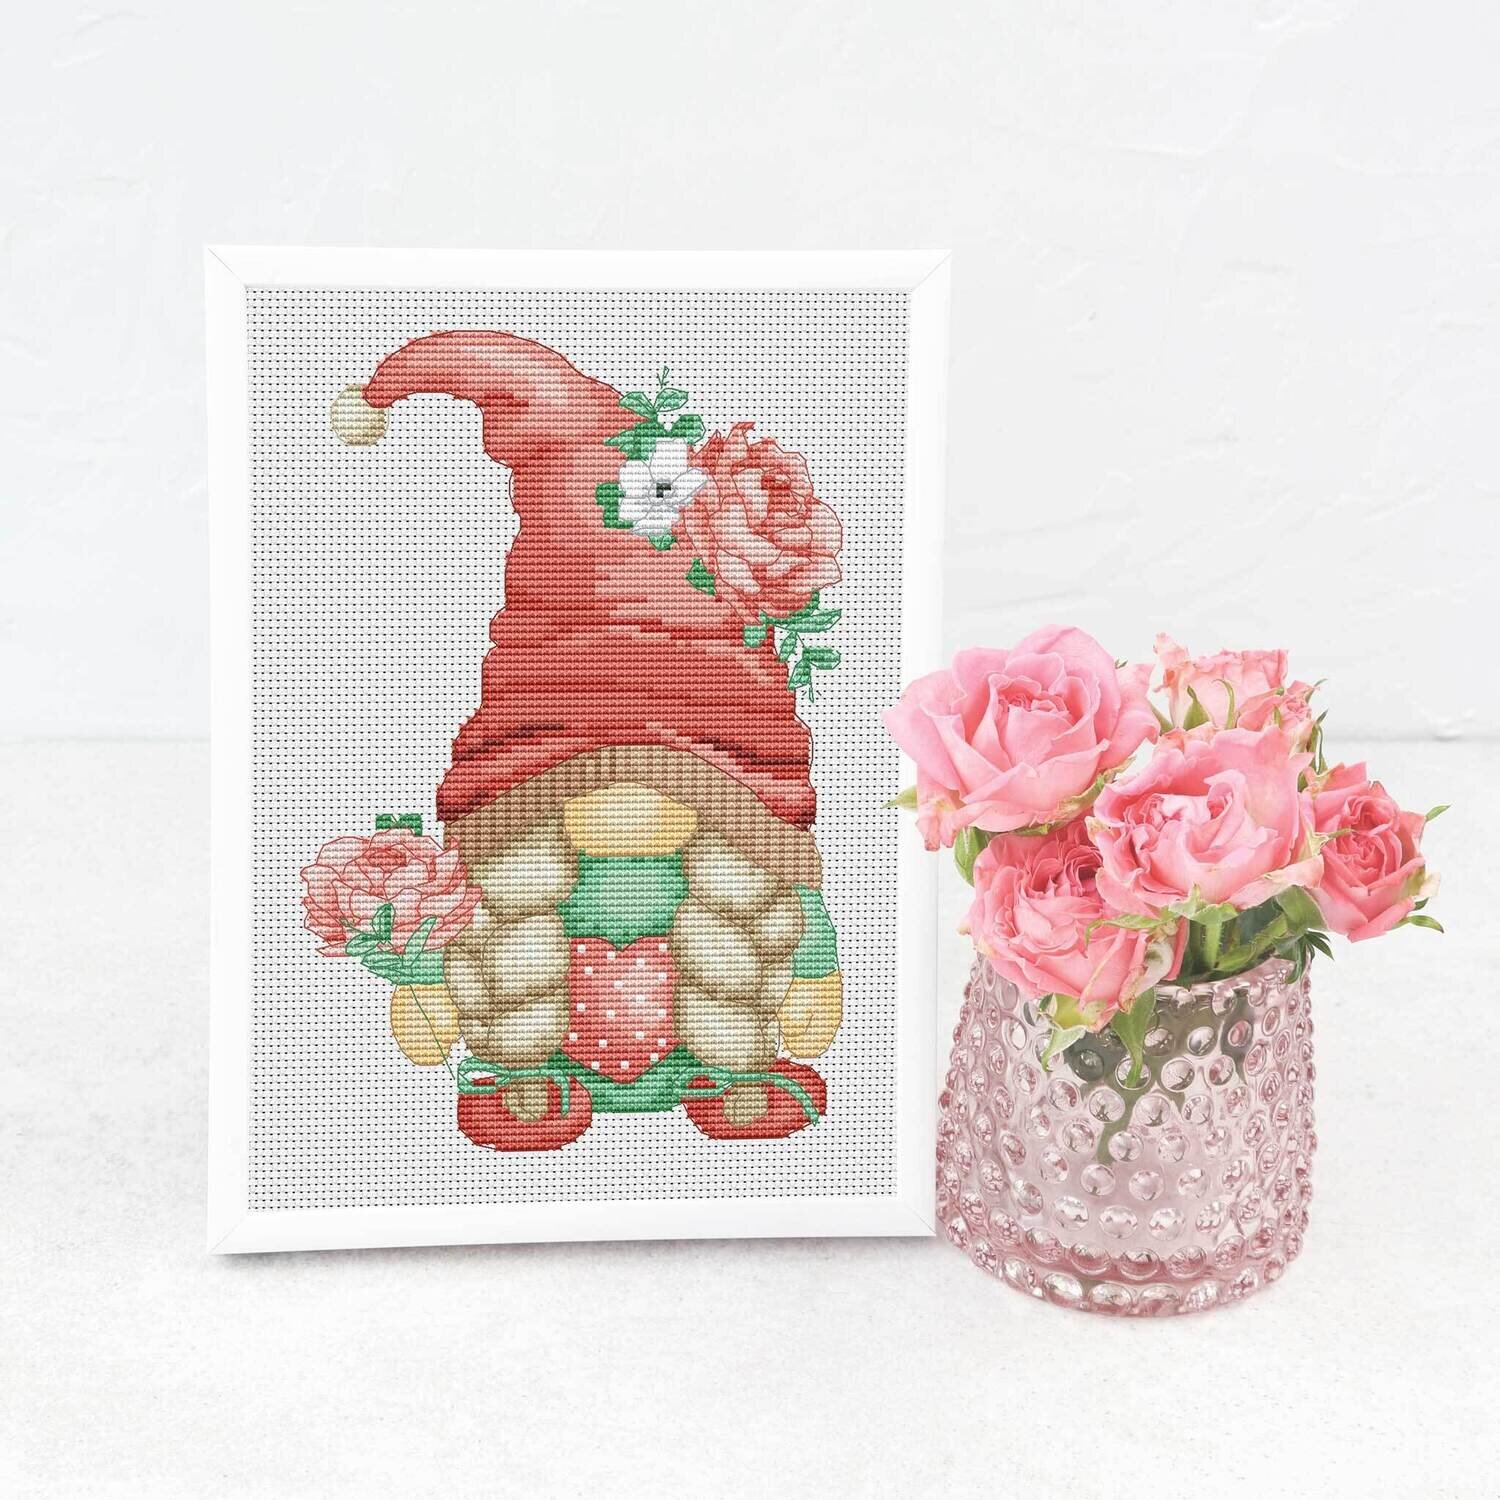 Girl with a roses, Cross stitch pattern, Gnome cross stitch, Floral cross stitch, Counted cross stitch, Spring cross stitch